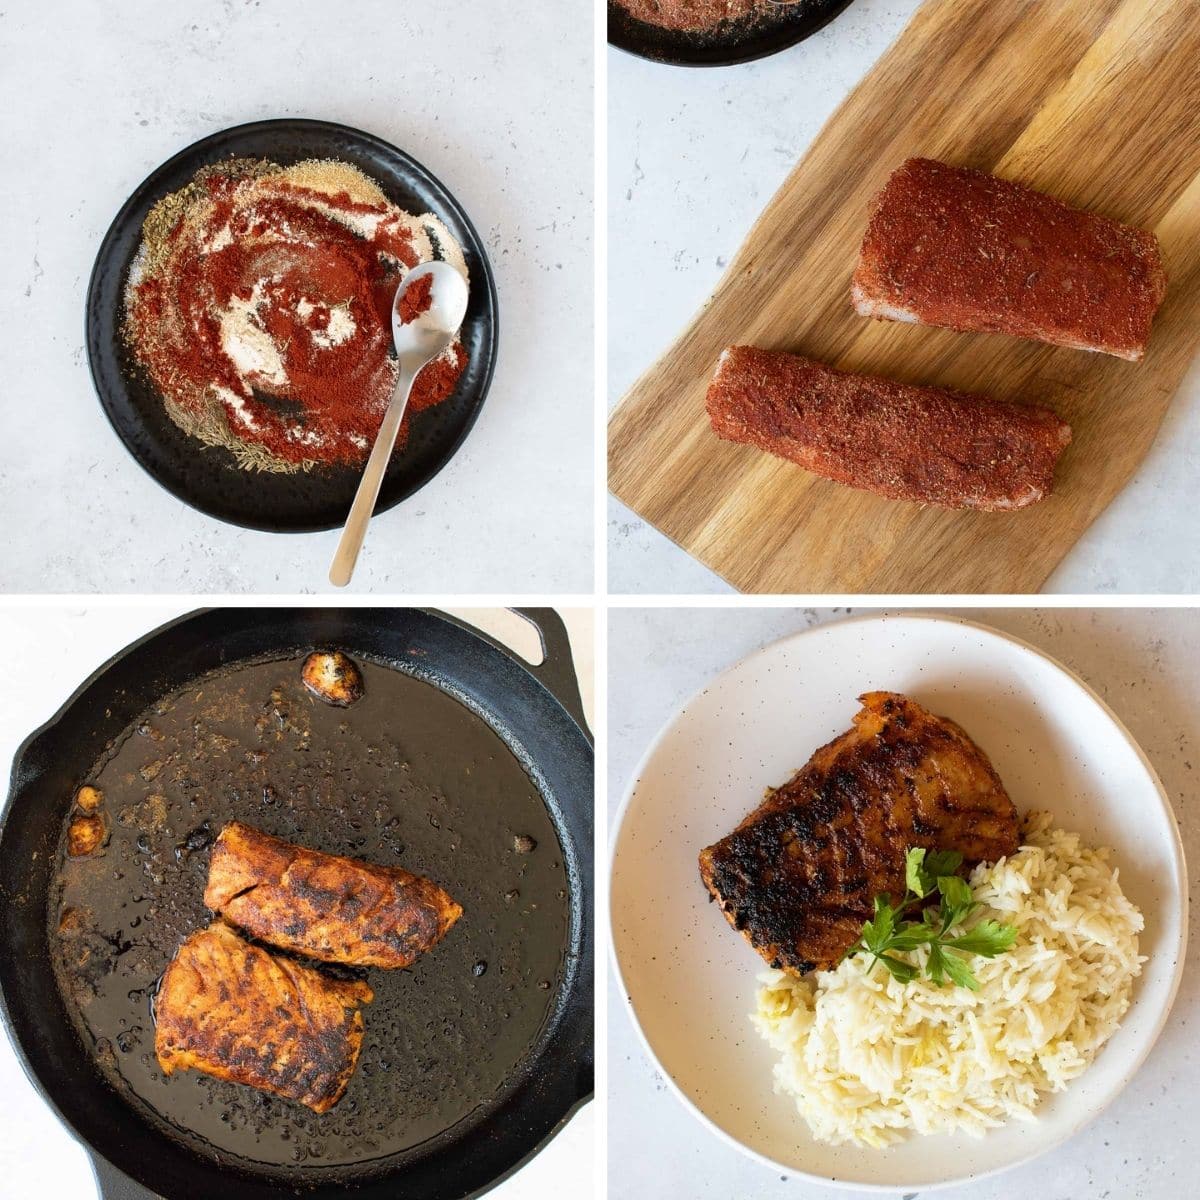 Step by step images showing how to make blackened cod.